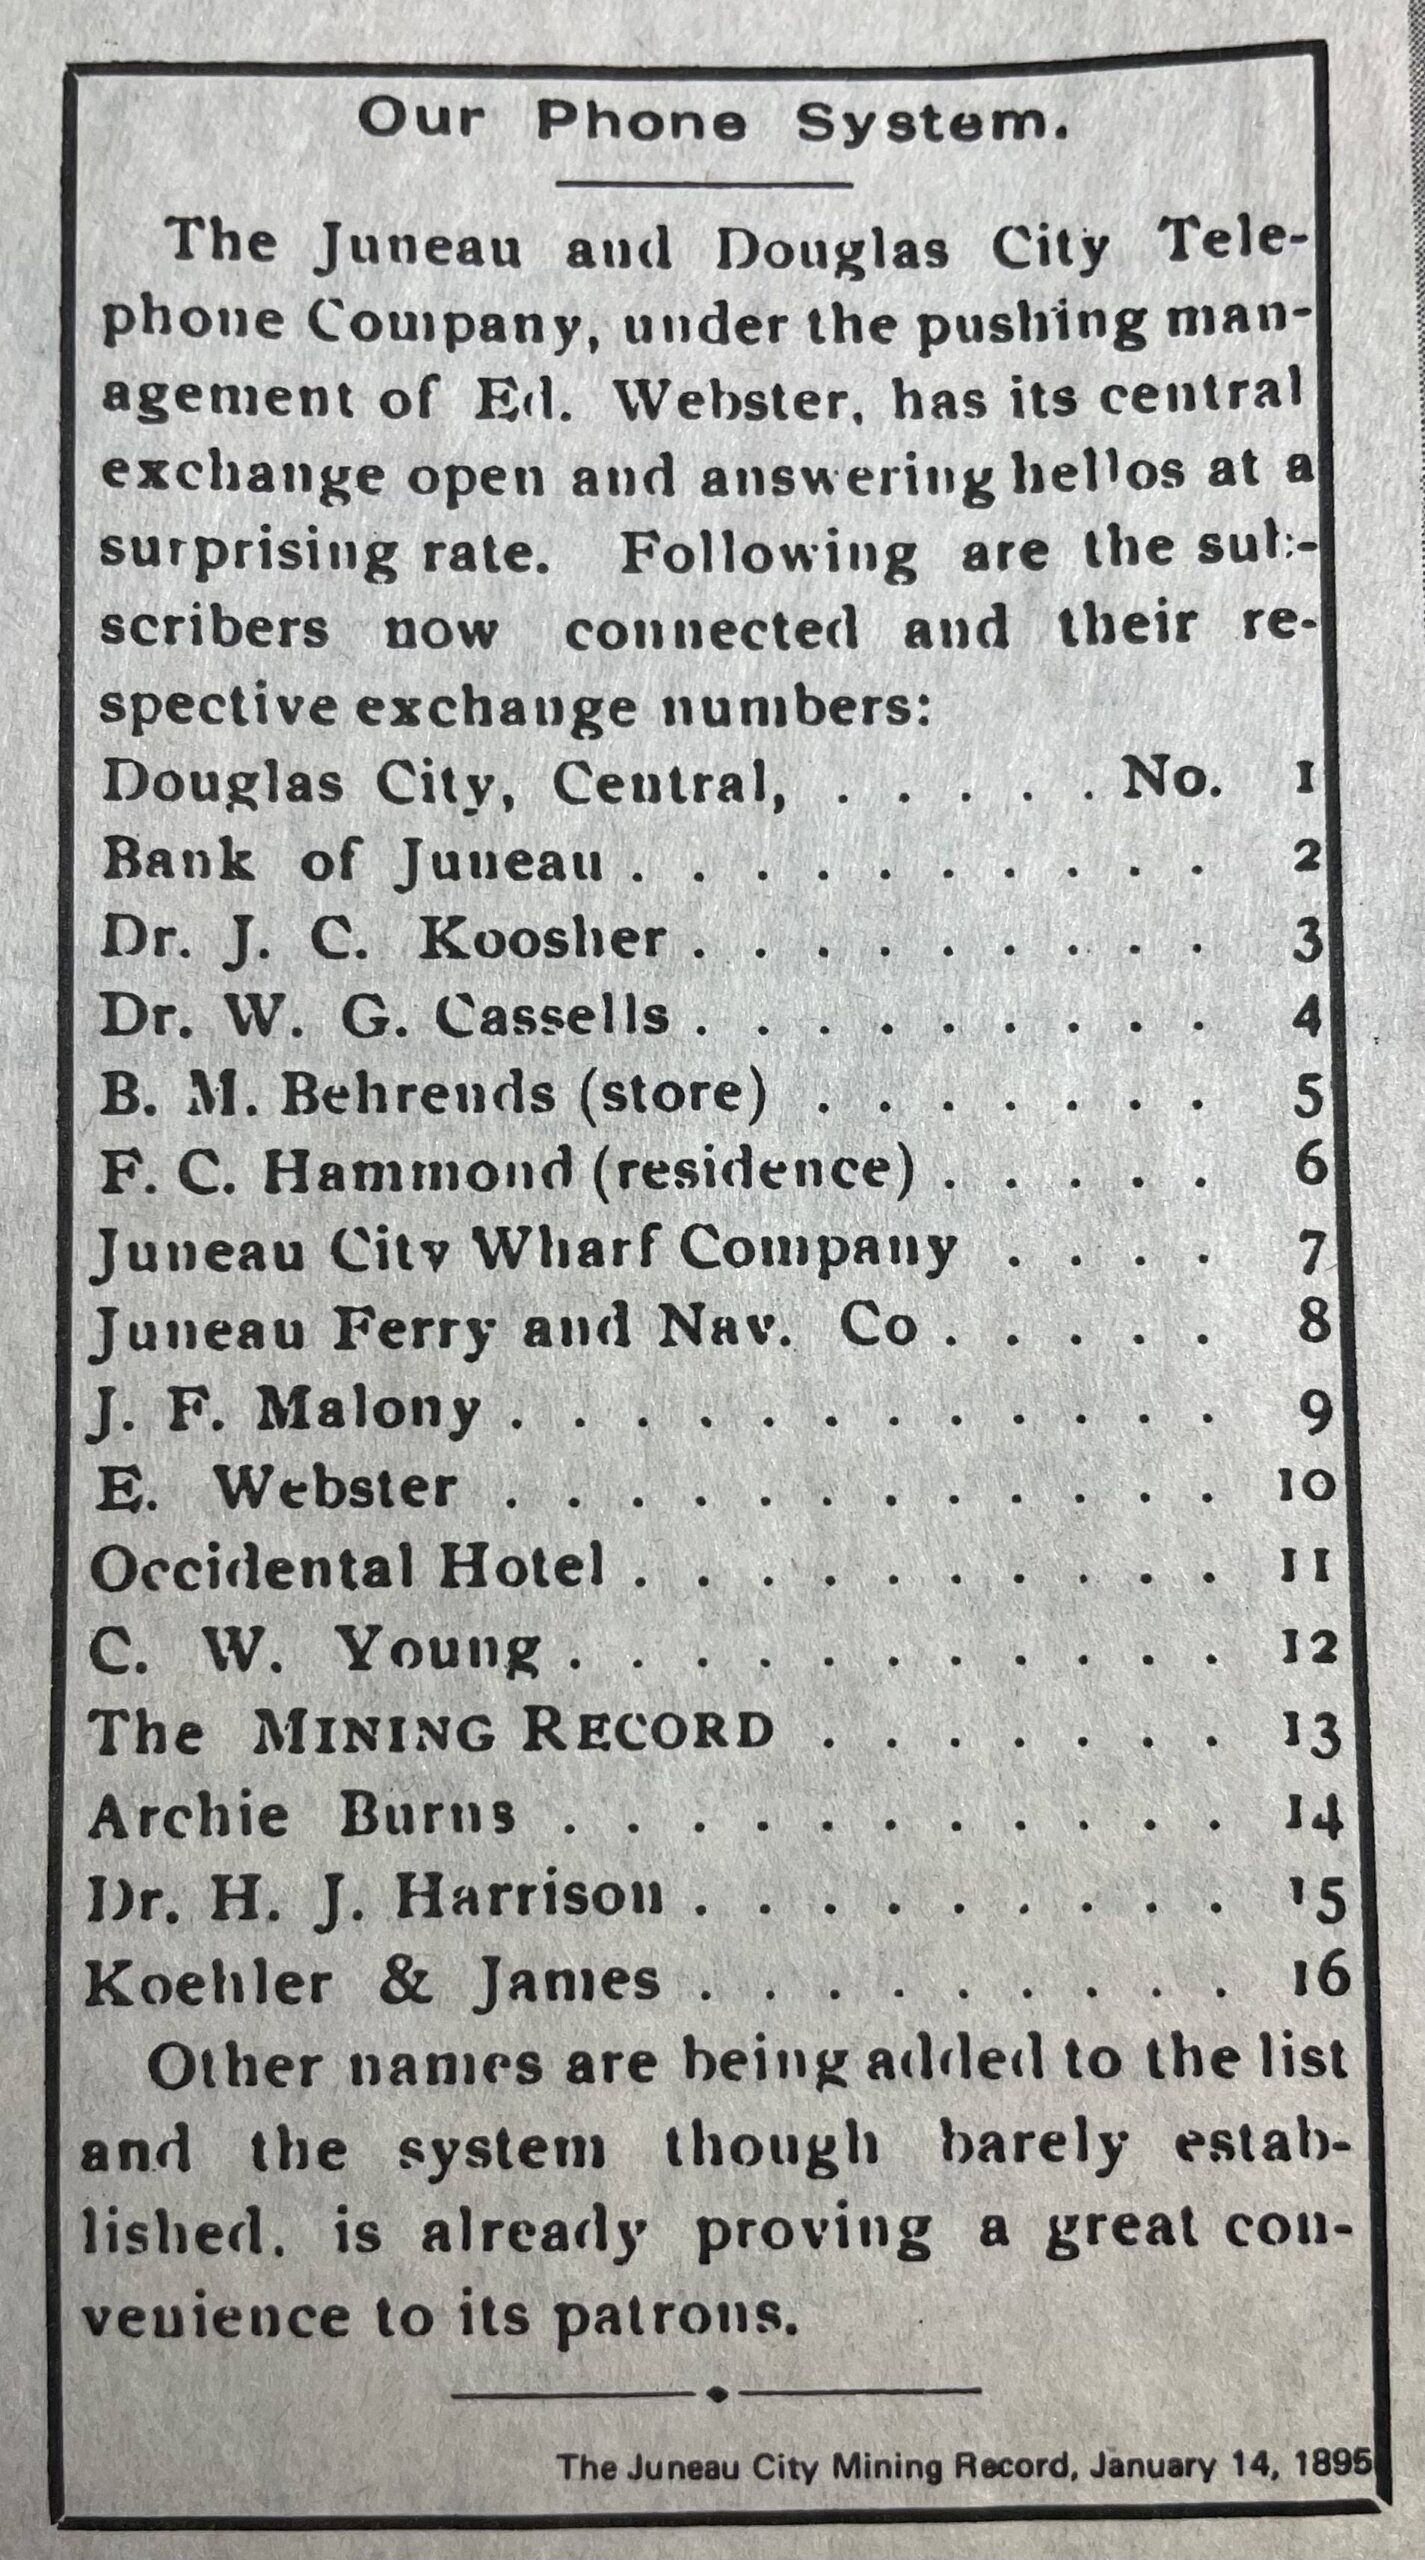 The Juneau and Douglas City Telephone Company directory of subscribers in 1895. (From telephone company advertisement in 1987 Juneau Empire special edition)